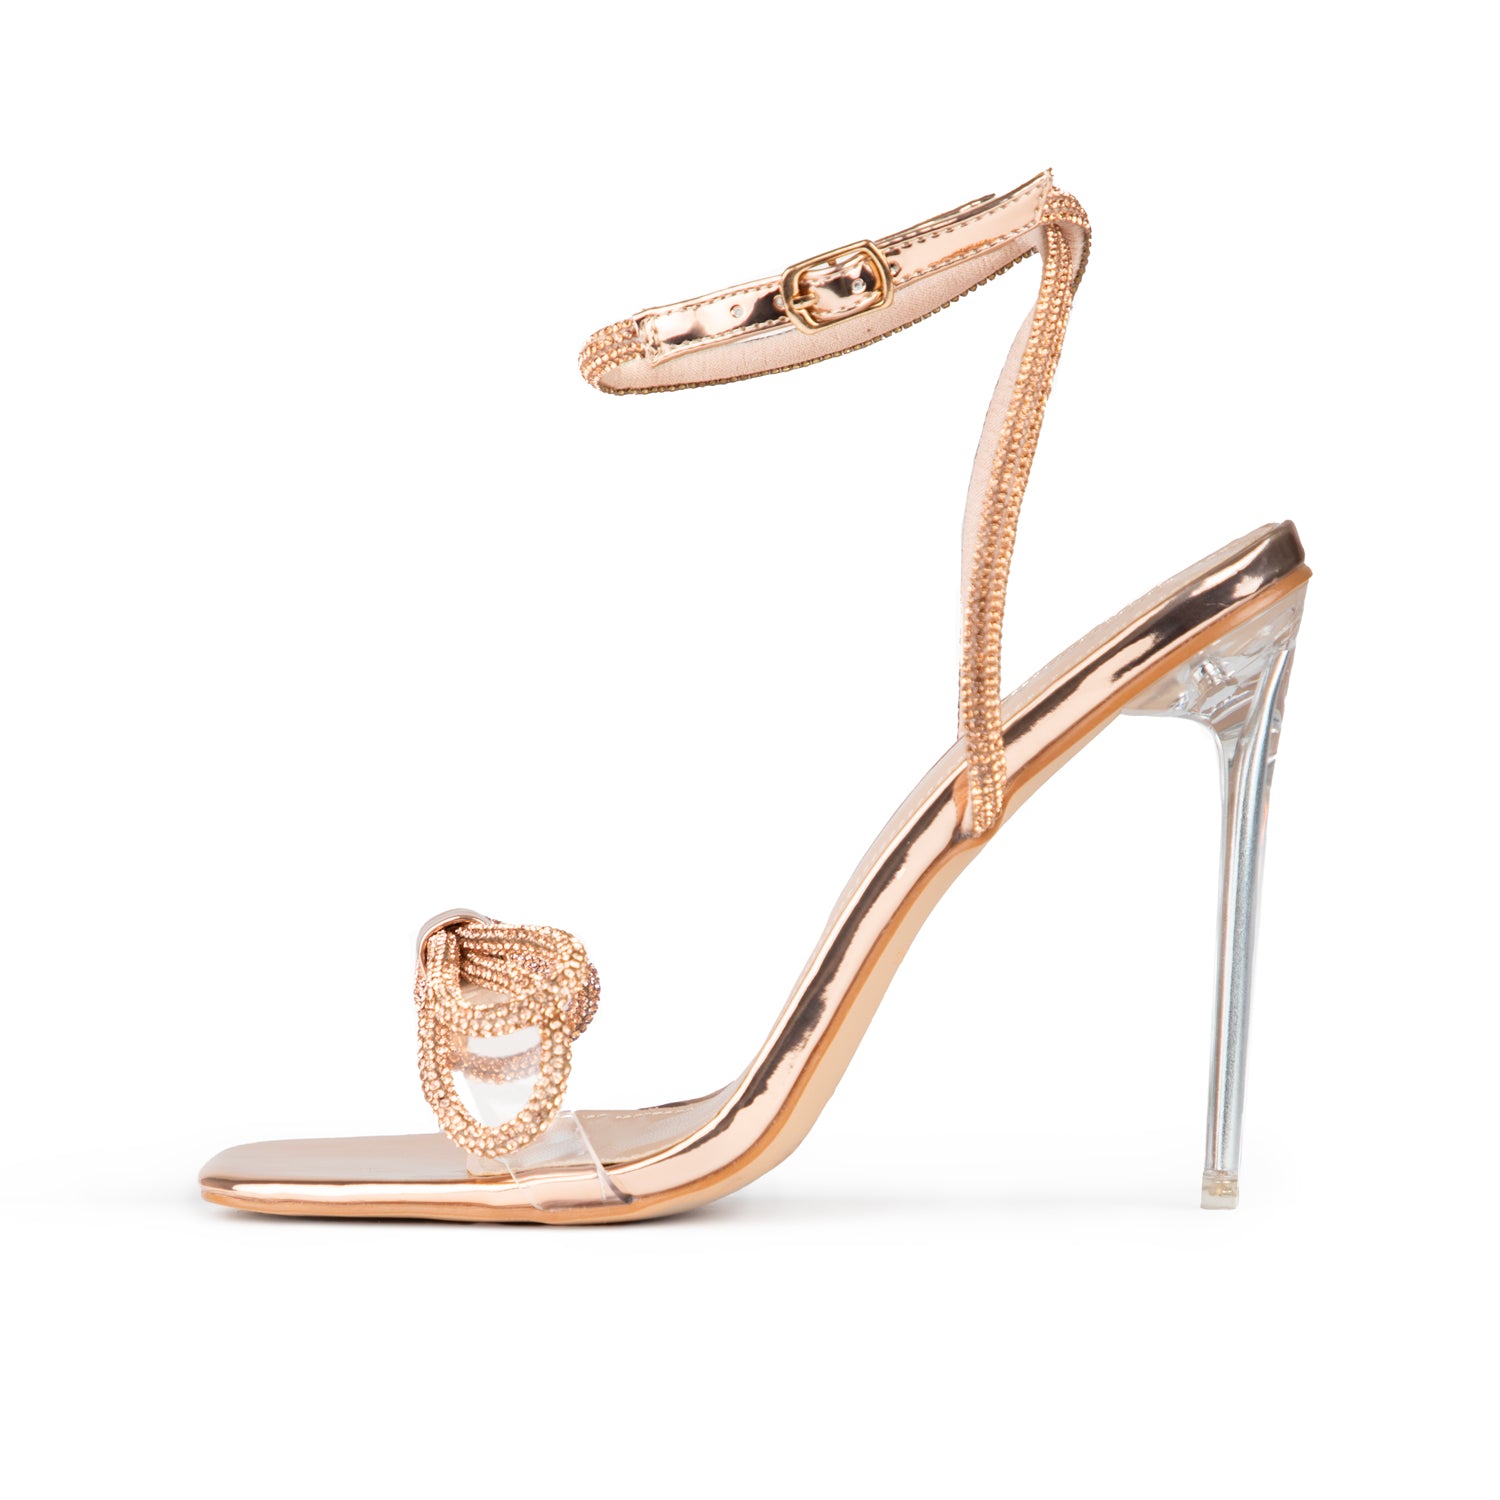 RAID Kyrahh Heeled Sandals in Rose Gold